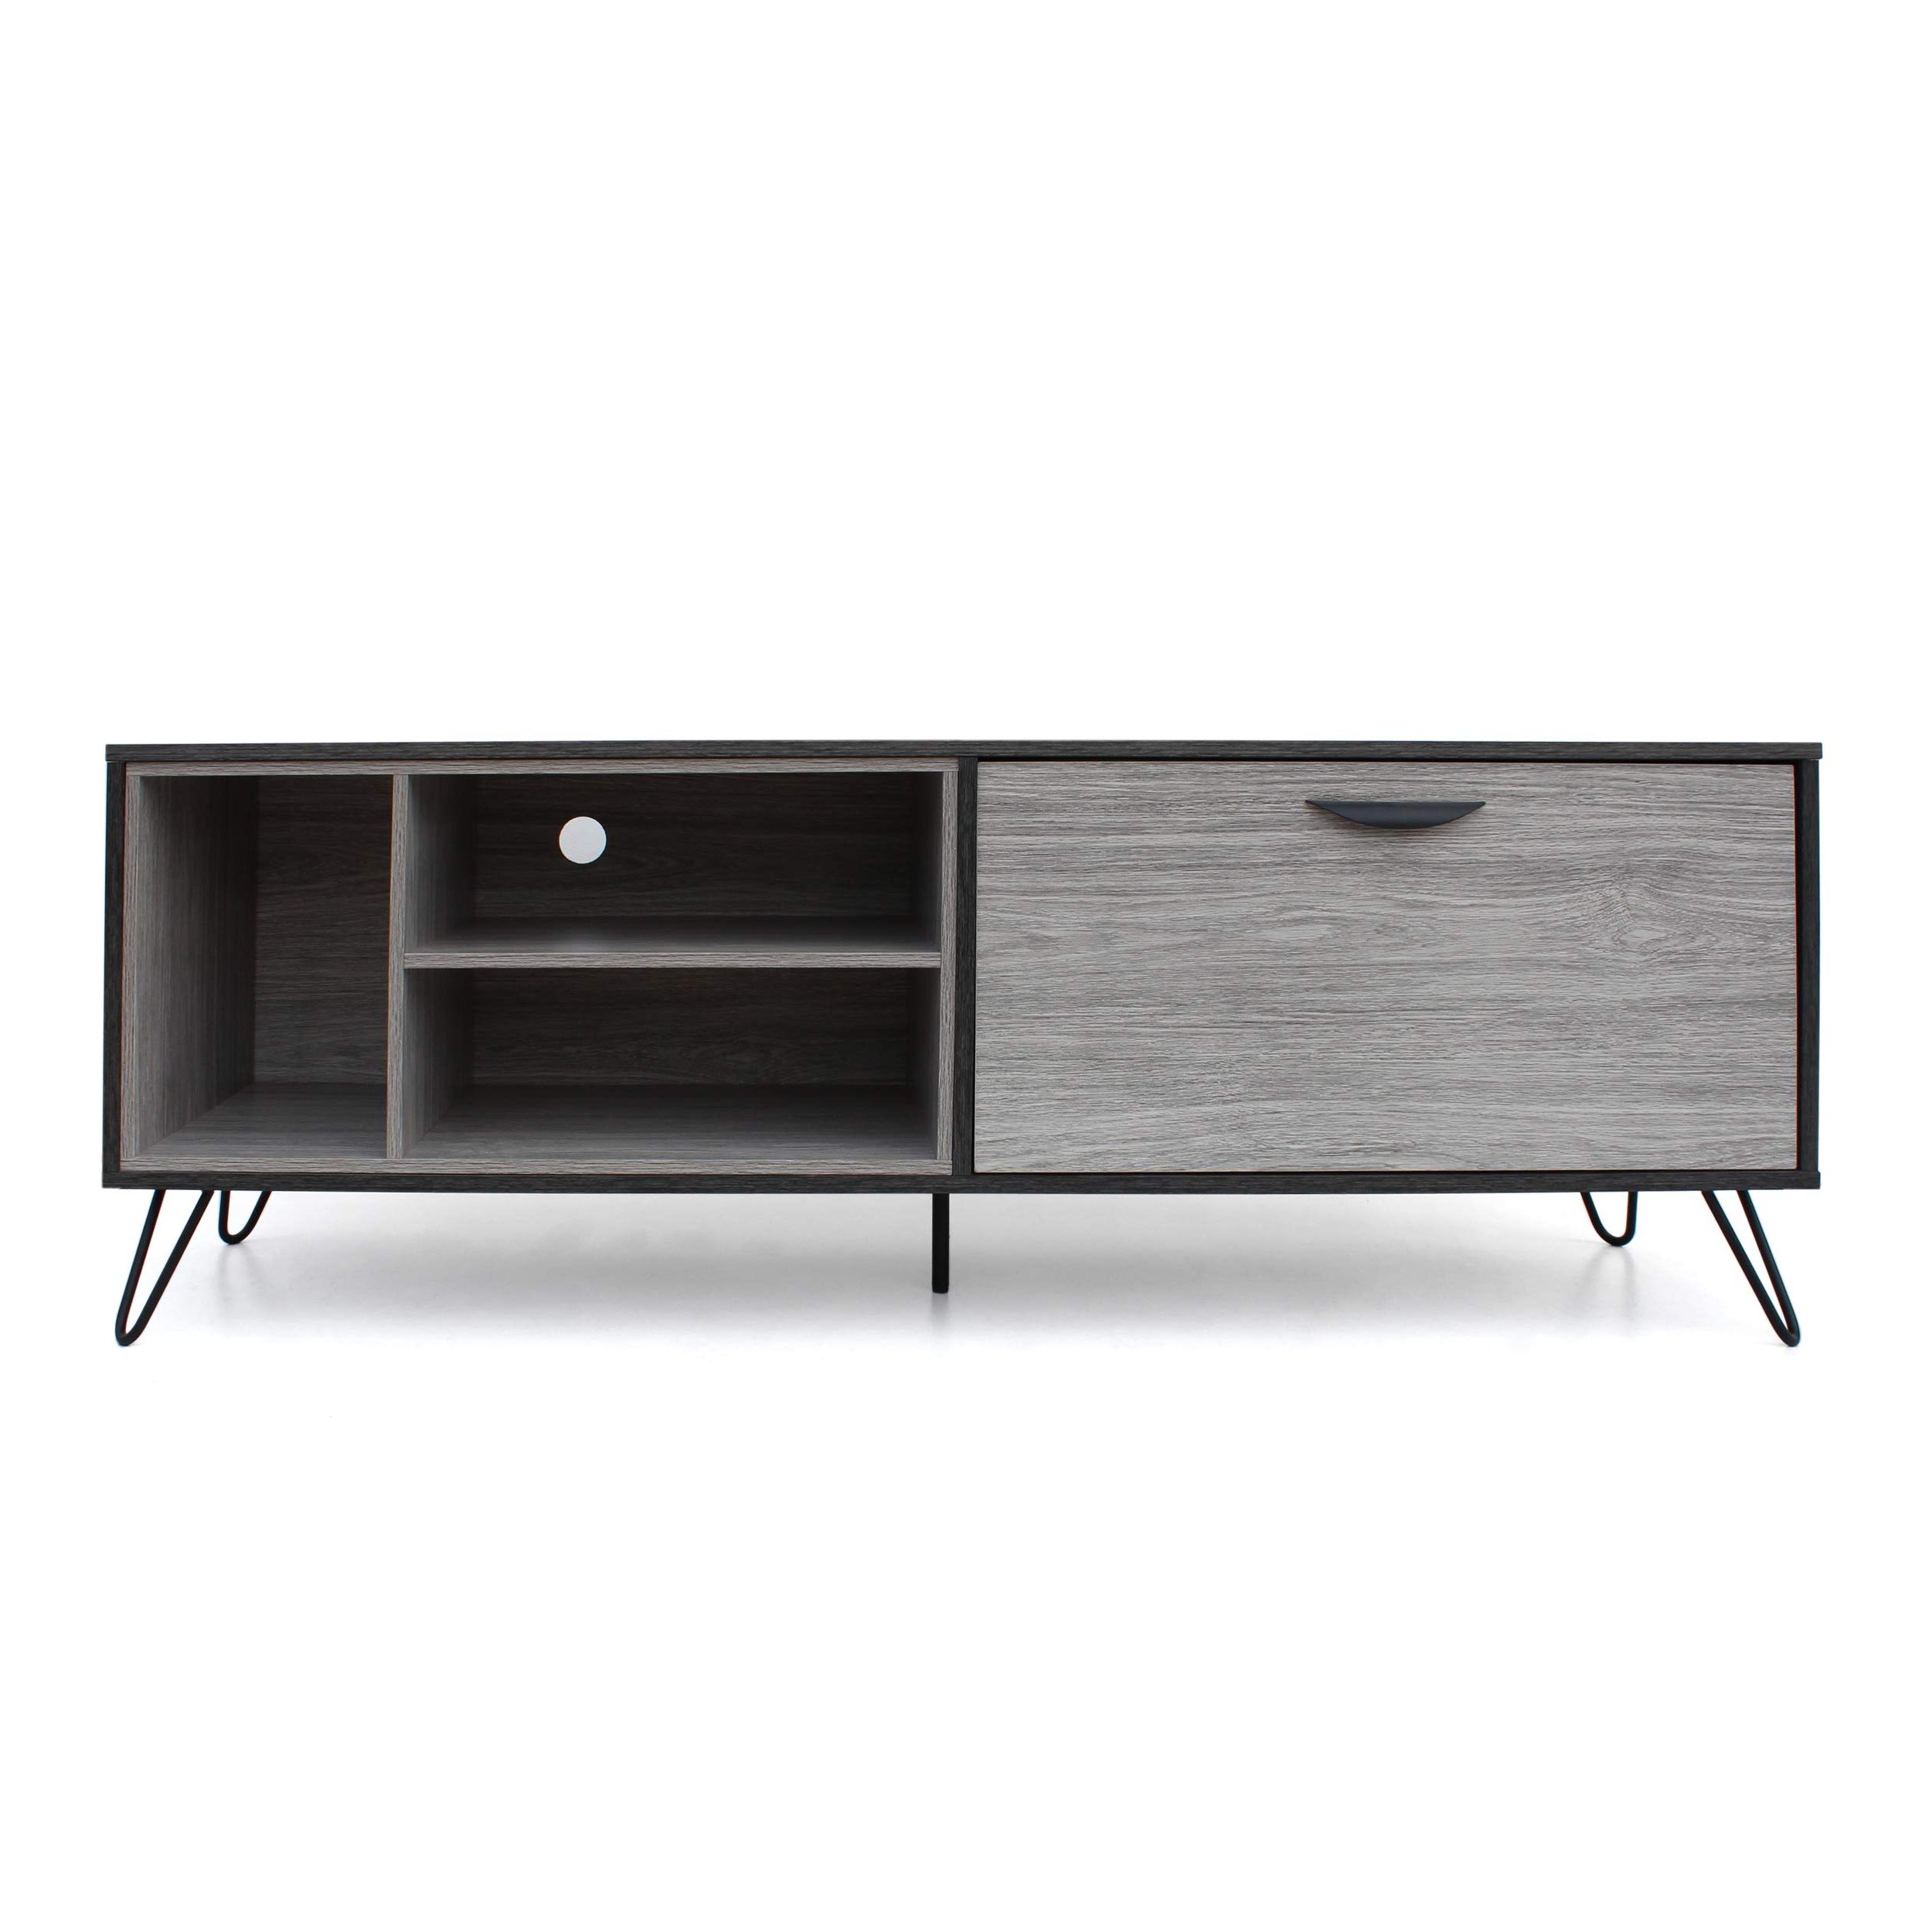 Recent Faux Wood Tv Stands Within Amazon: Christopher Knight Home Dorrin Mid Century Modern Faux Wood Tv  Stand, Sonoma Grey Oak / Grey Oak / Black : Home & Kitchen (View 3 of 10)